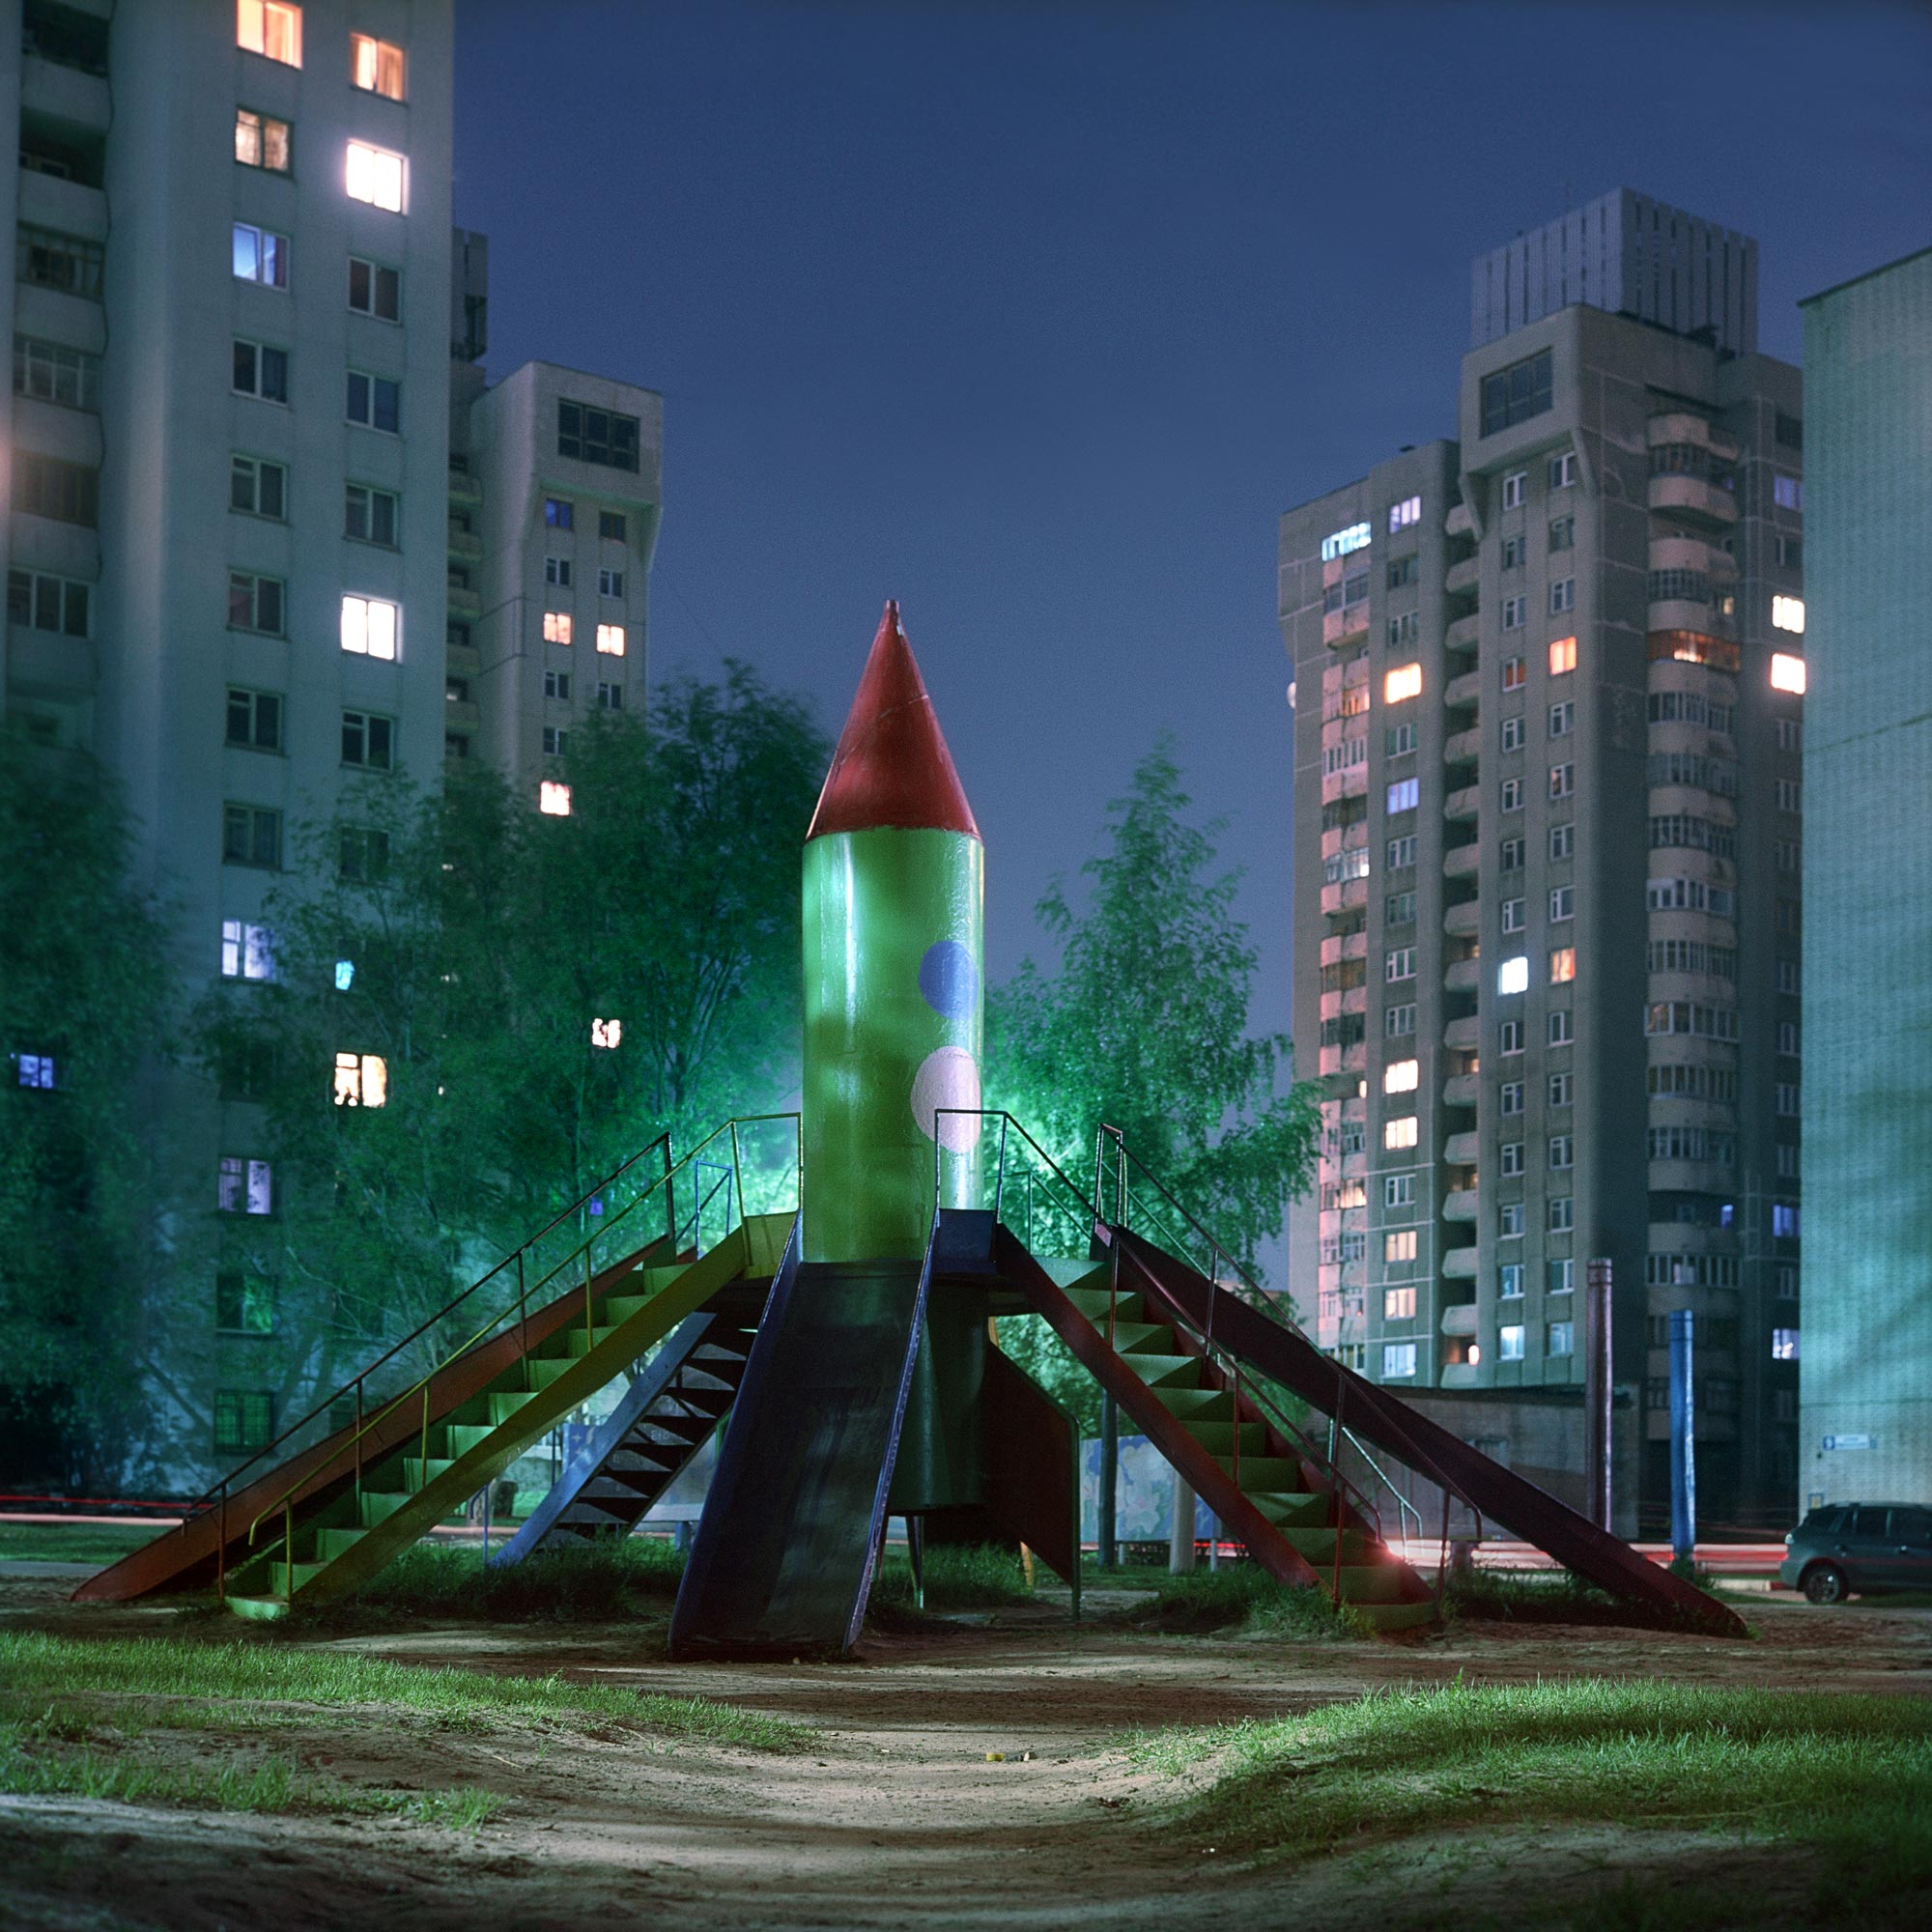 Rockets away: how Soviet space dreams became child's play